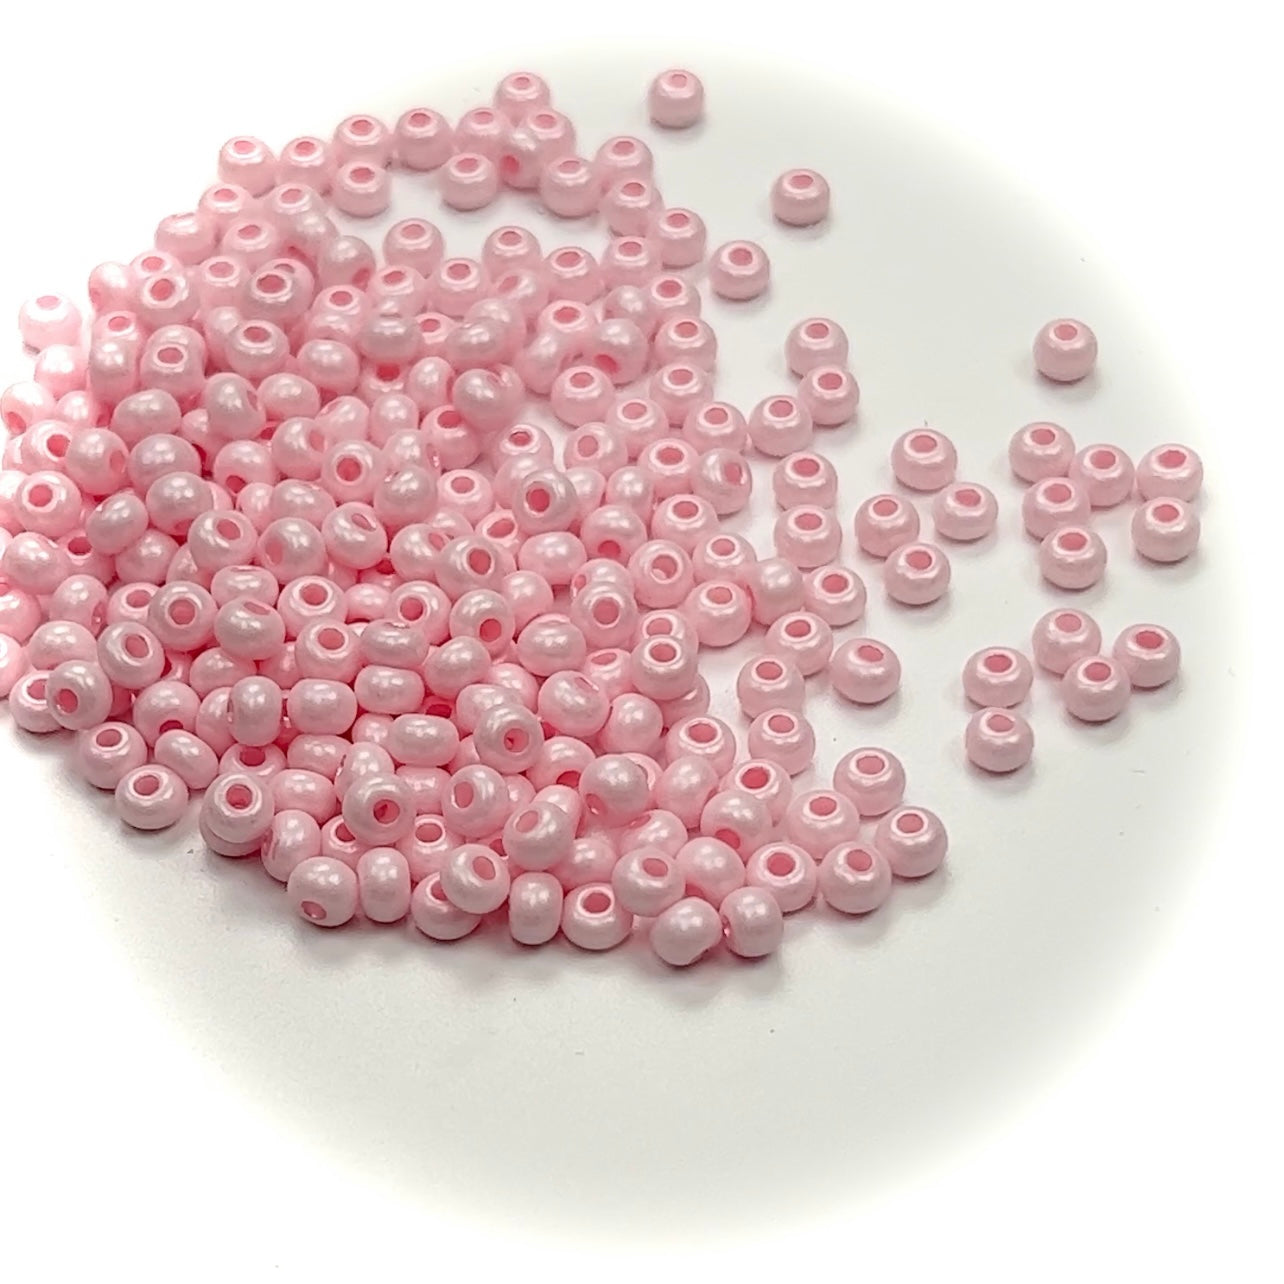 Rocailles size 6/0 (4mm) Pink Dyed Pearl, Preciosa Ornela Traditional Czech Glass Seed Beads, 30grams (1 oz), P959